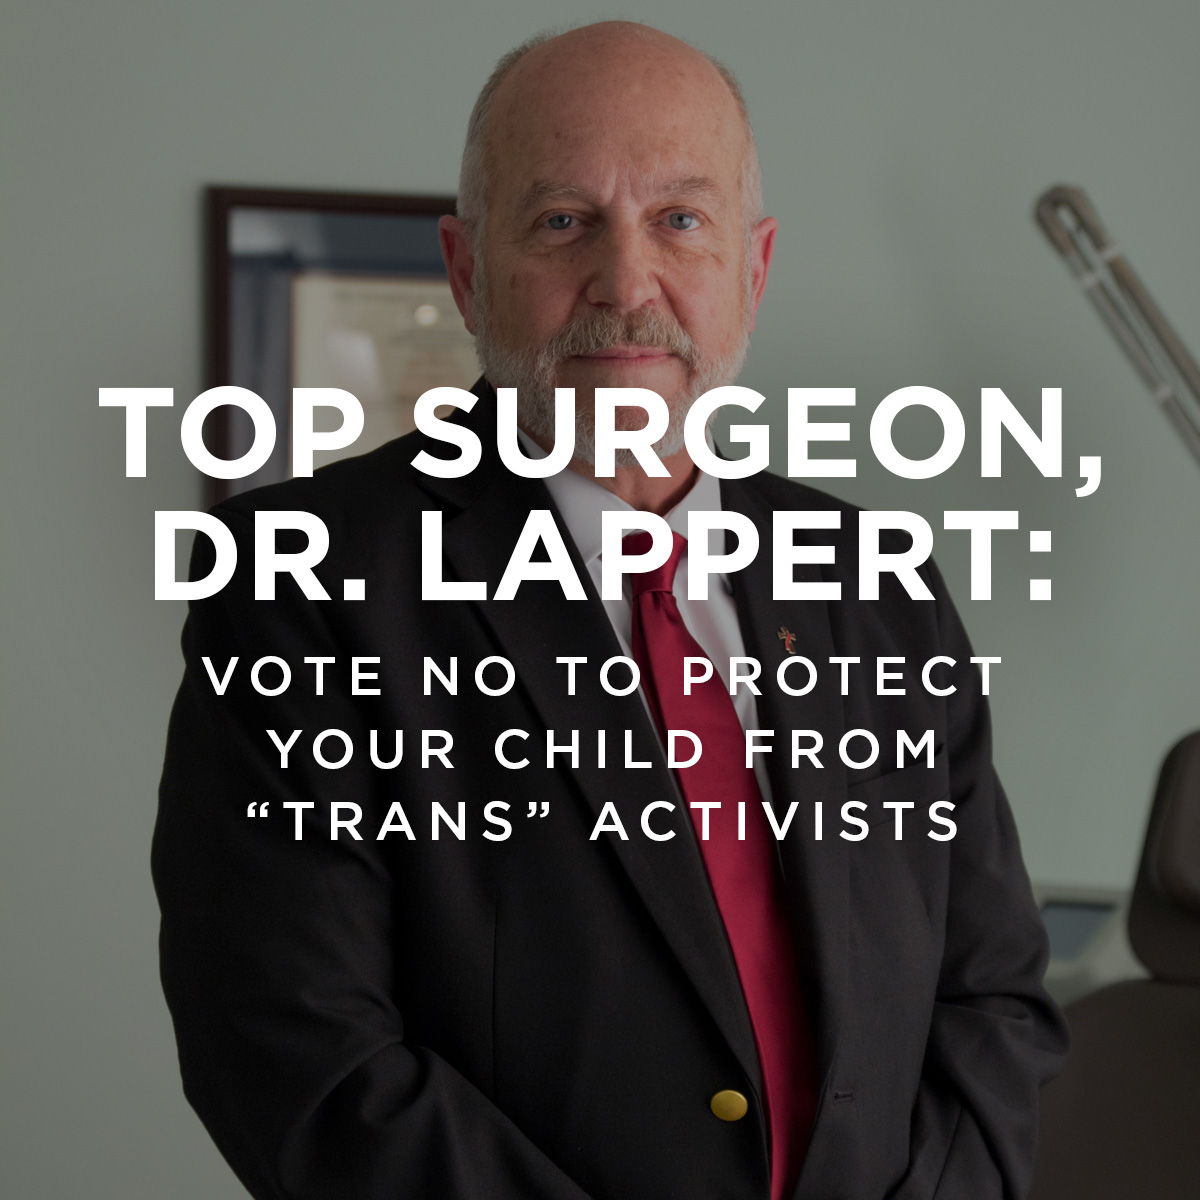 Dr. Lappert: Vote no to protect your child from “trans” activists